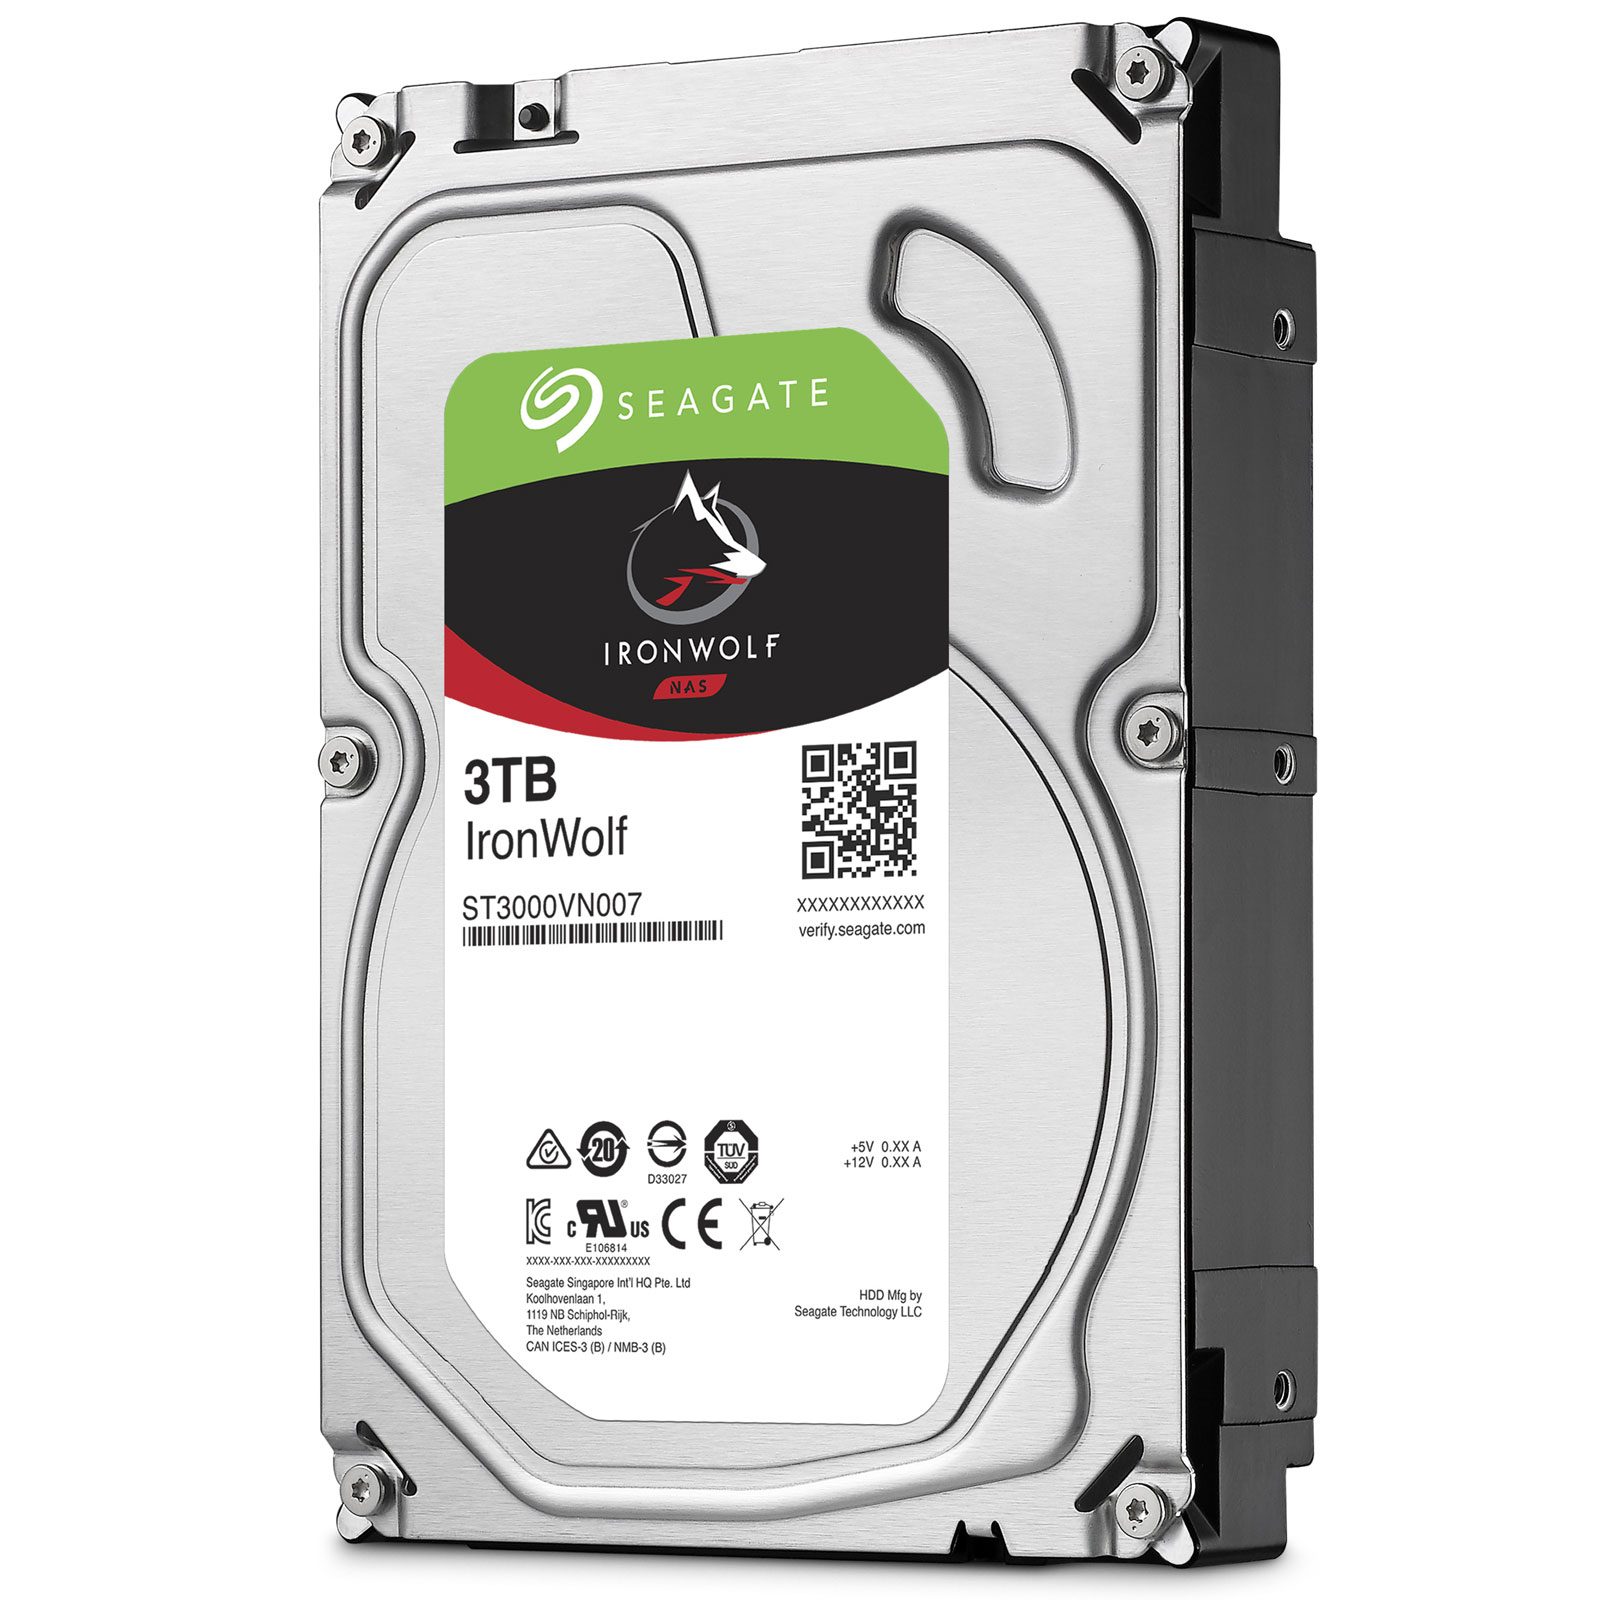 HDD Seagate IronWolf 3TB ST3000VN007 3.5 inch SATA III 64MB Cache 5900RPM